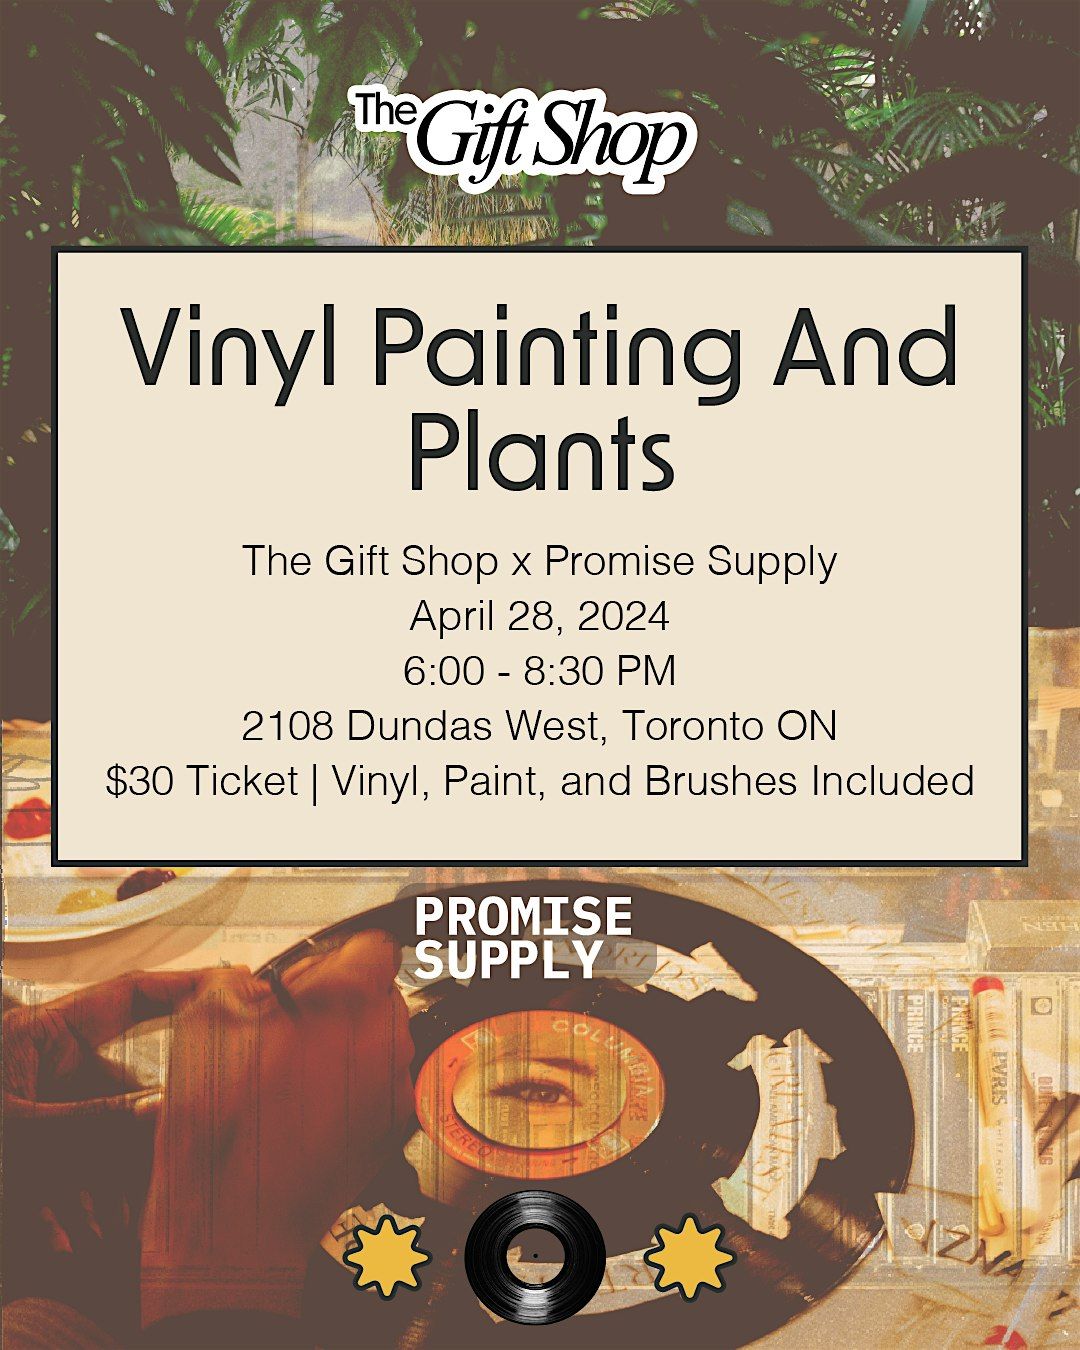 Vinyl Painting and Plants